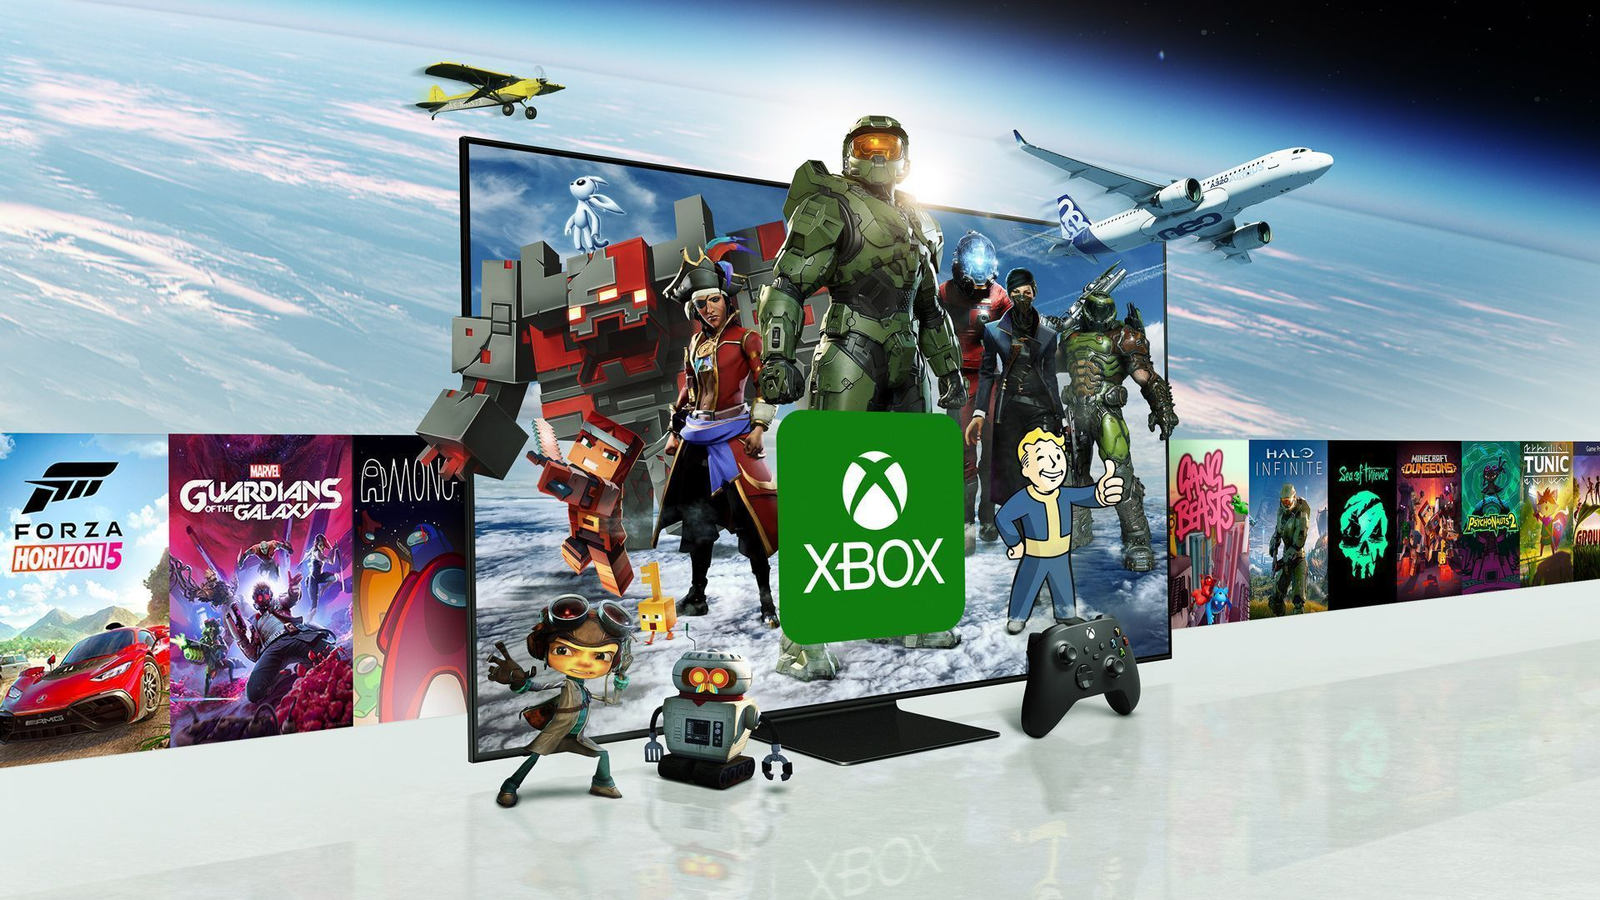 How many users could the Microsoft/Activision deal bring to Xbox